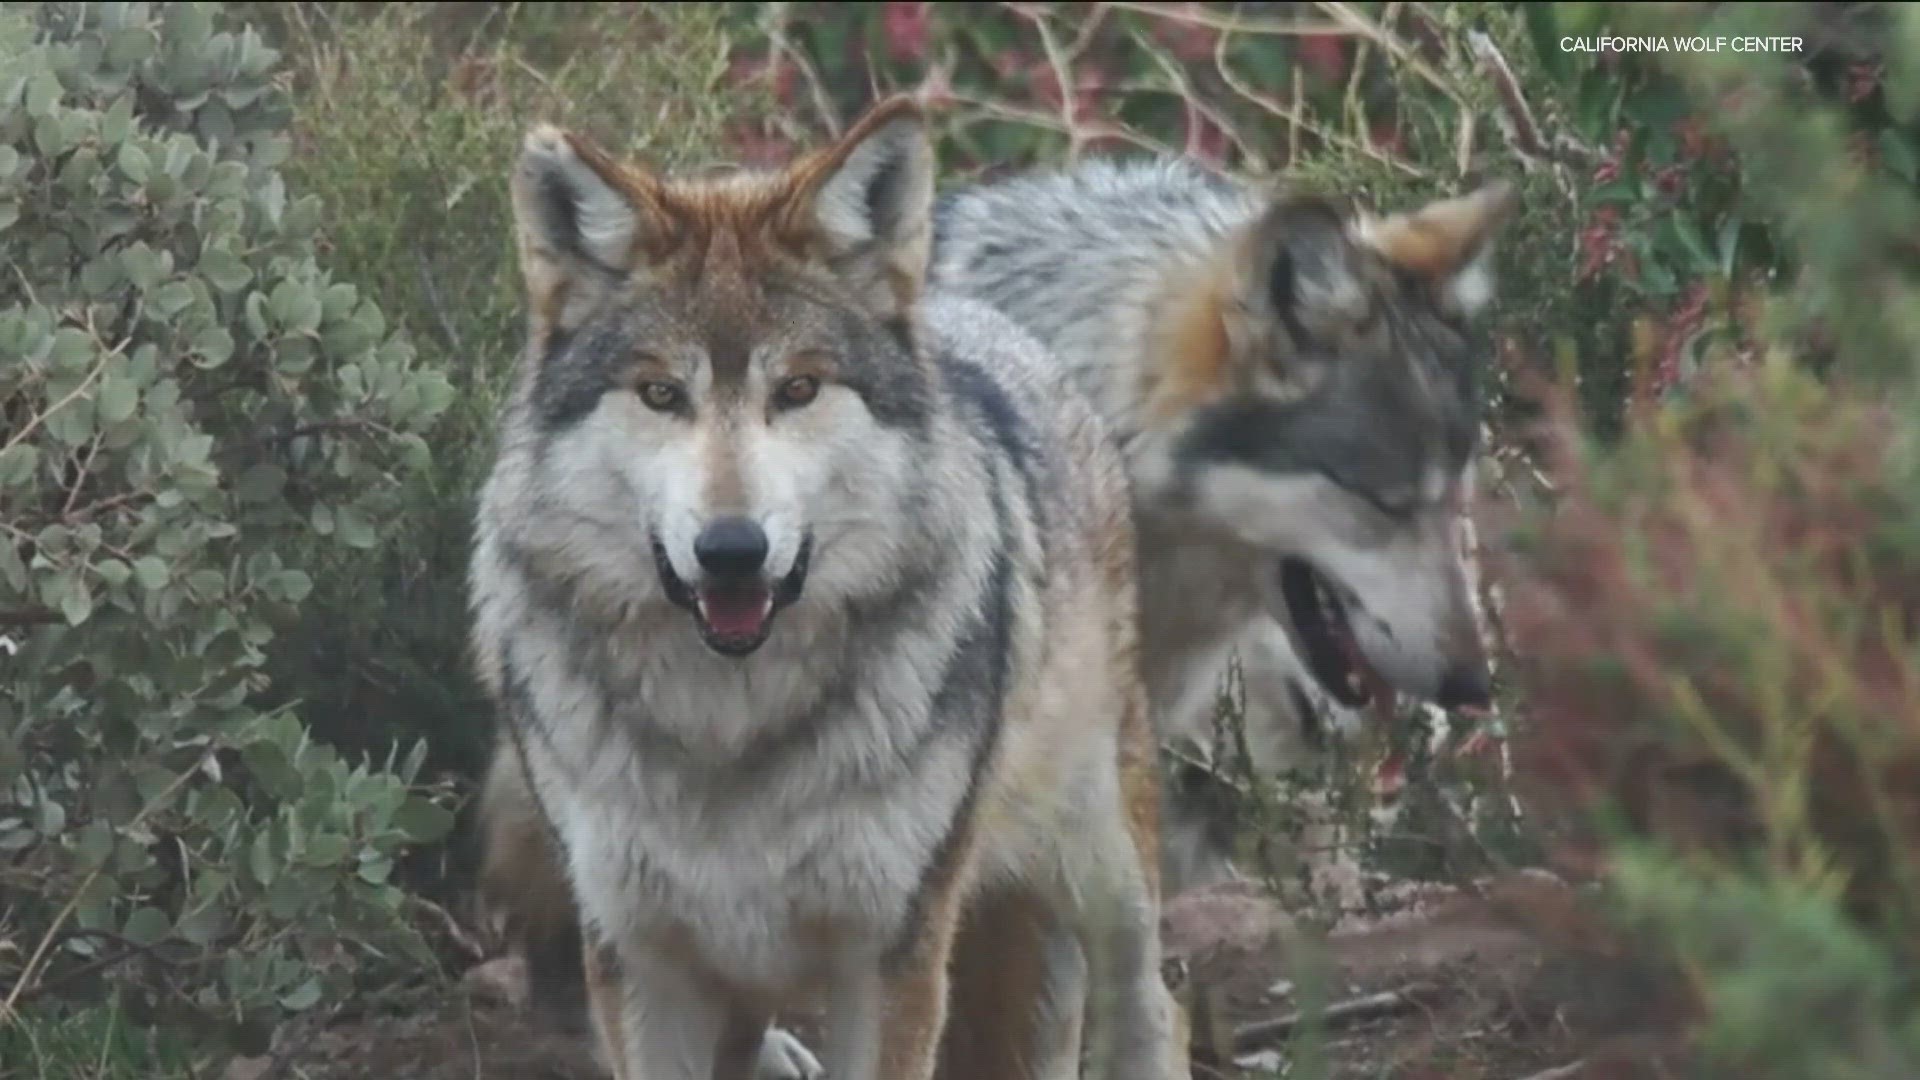 Last week, 23 Mexican gray wolves roamed the California Wolf Center in Julian. But for young males in a pack, even these hills can get crowded.